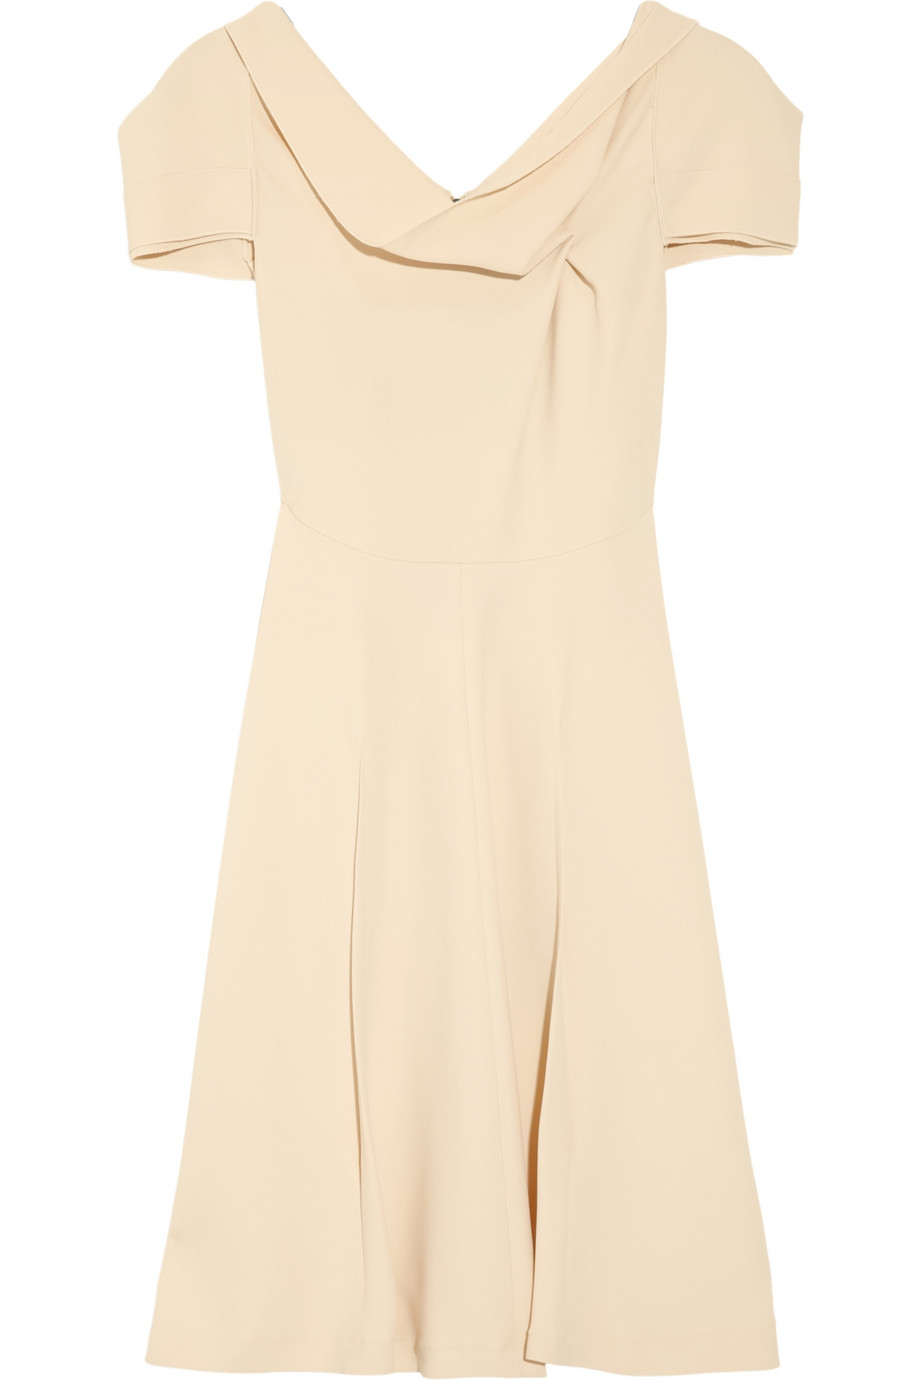 Roland mouret Losberne Pleated Stretchcrepe Dress in Natural | Lyst